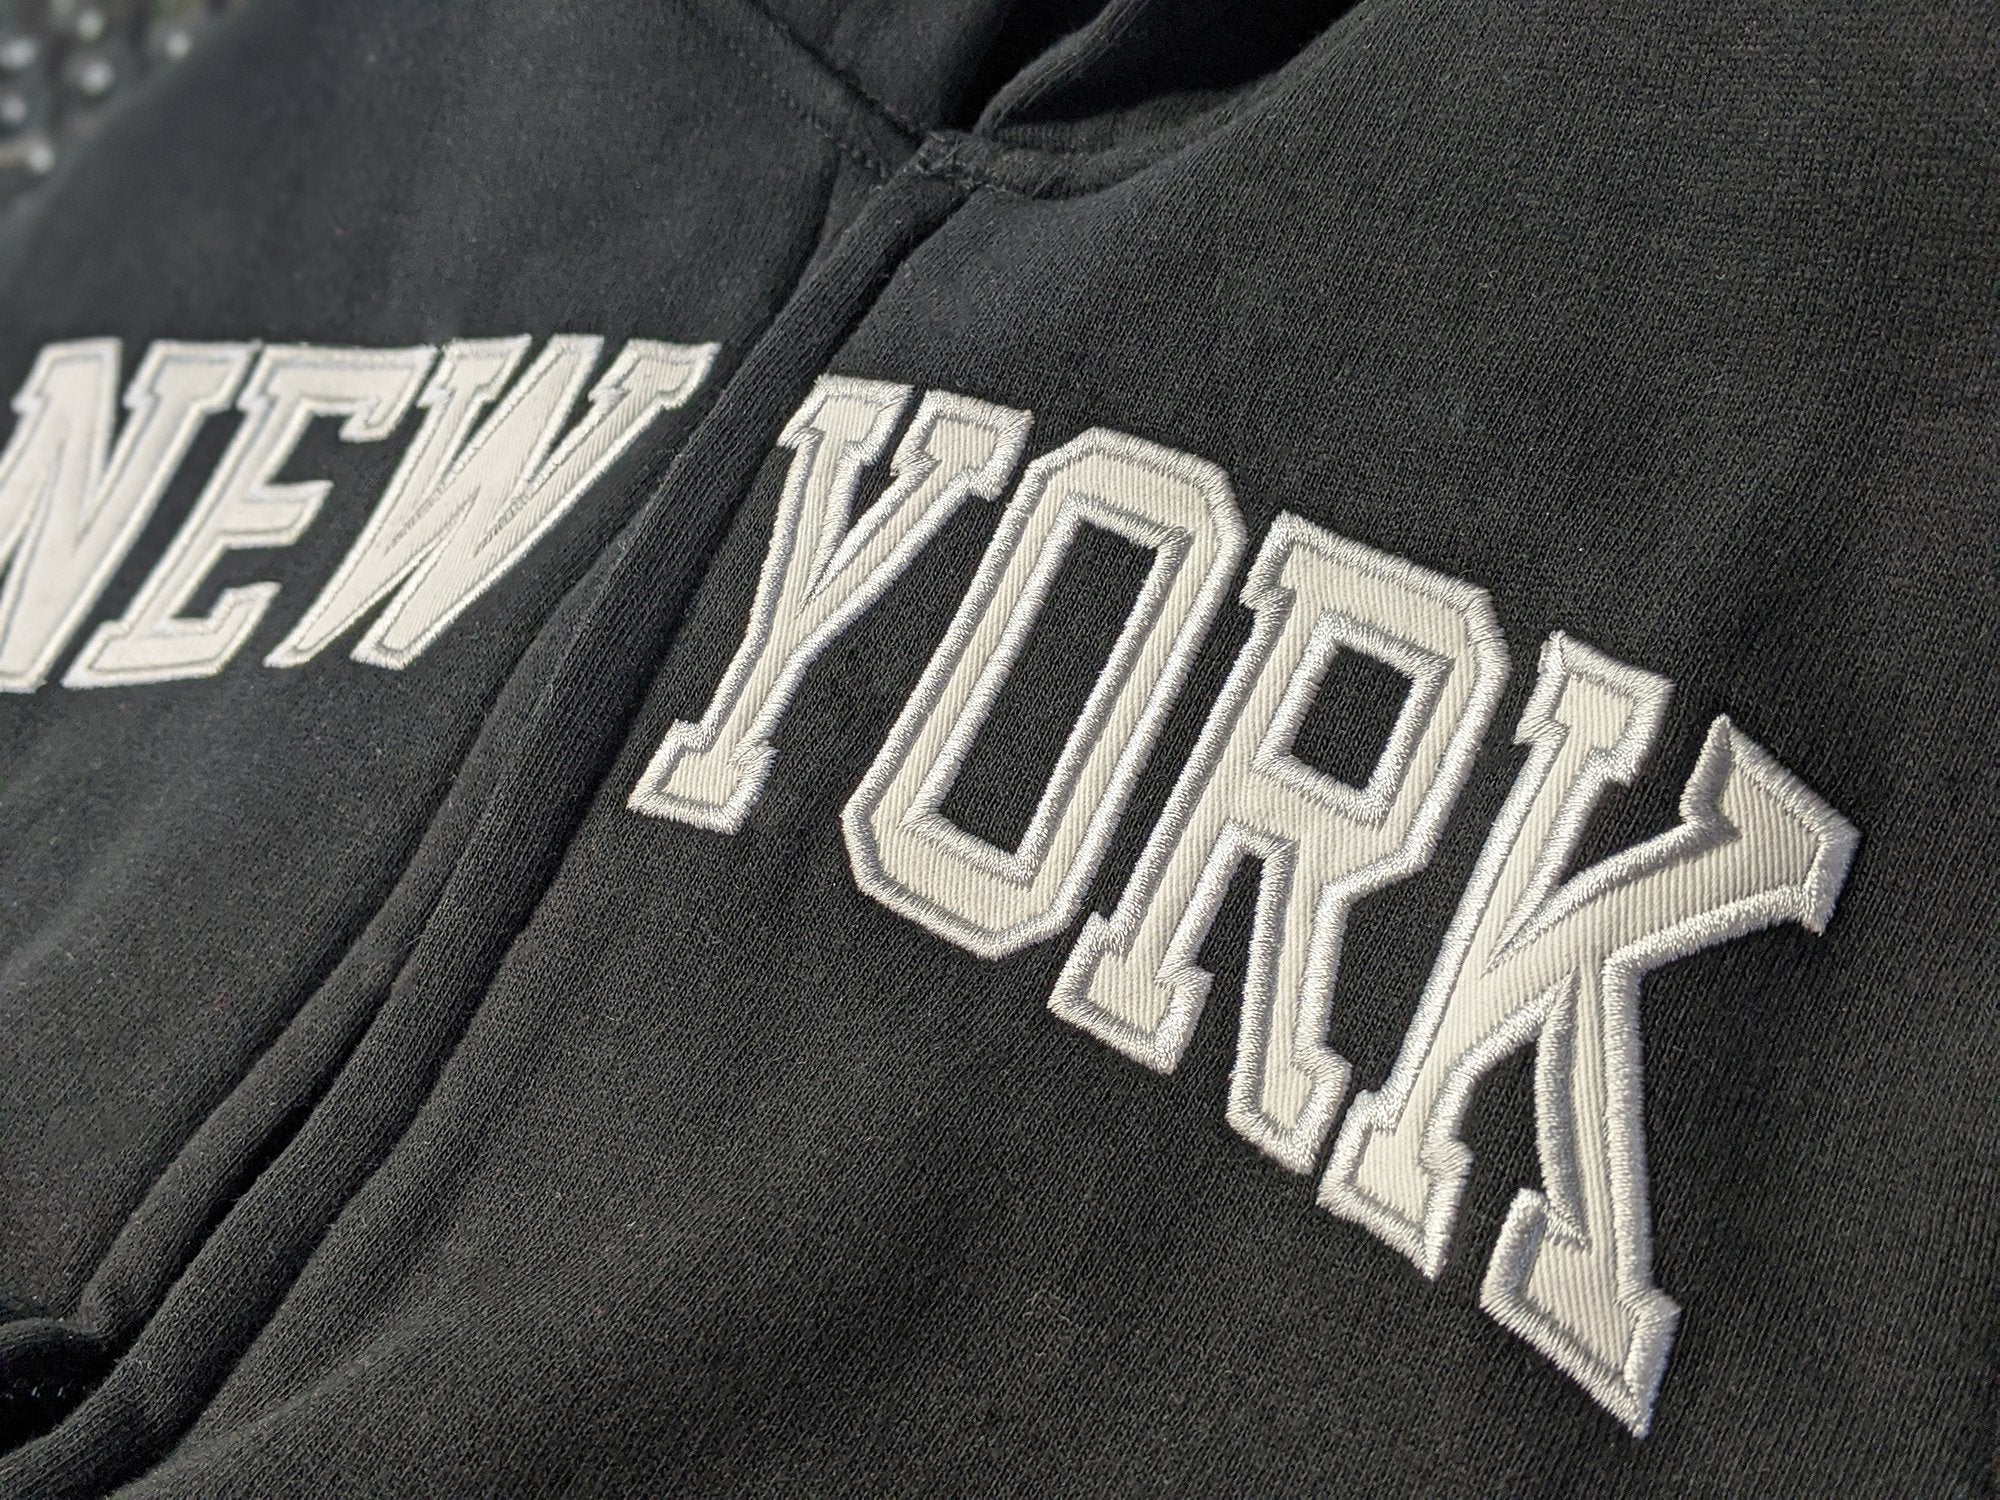 New York Zipper Hoodie - Size: Adult X-Large - Color: Black